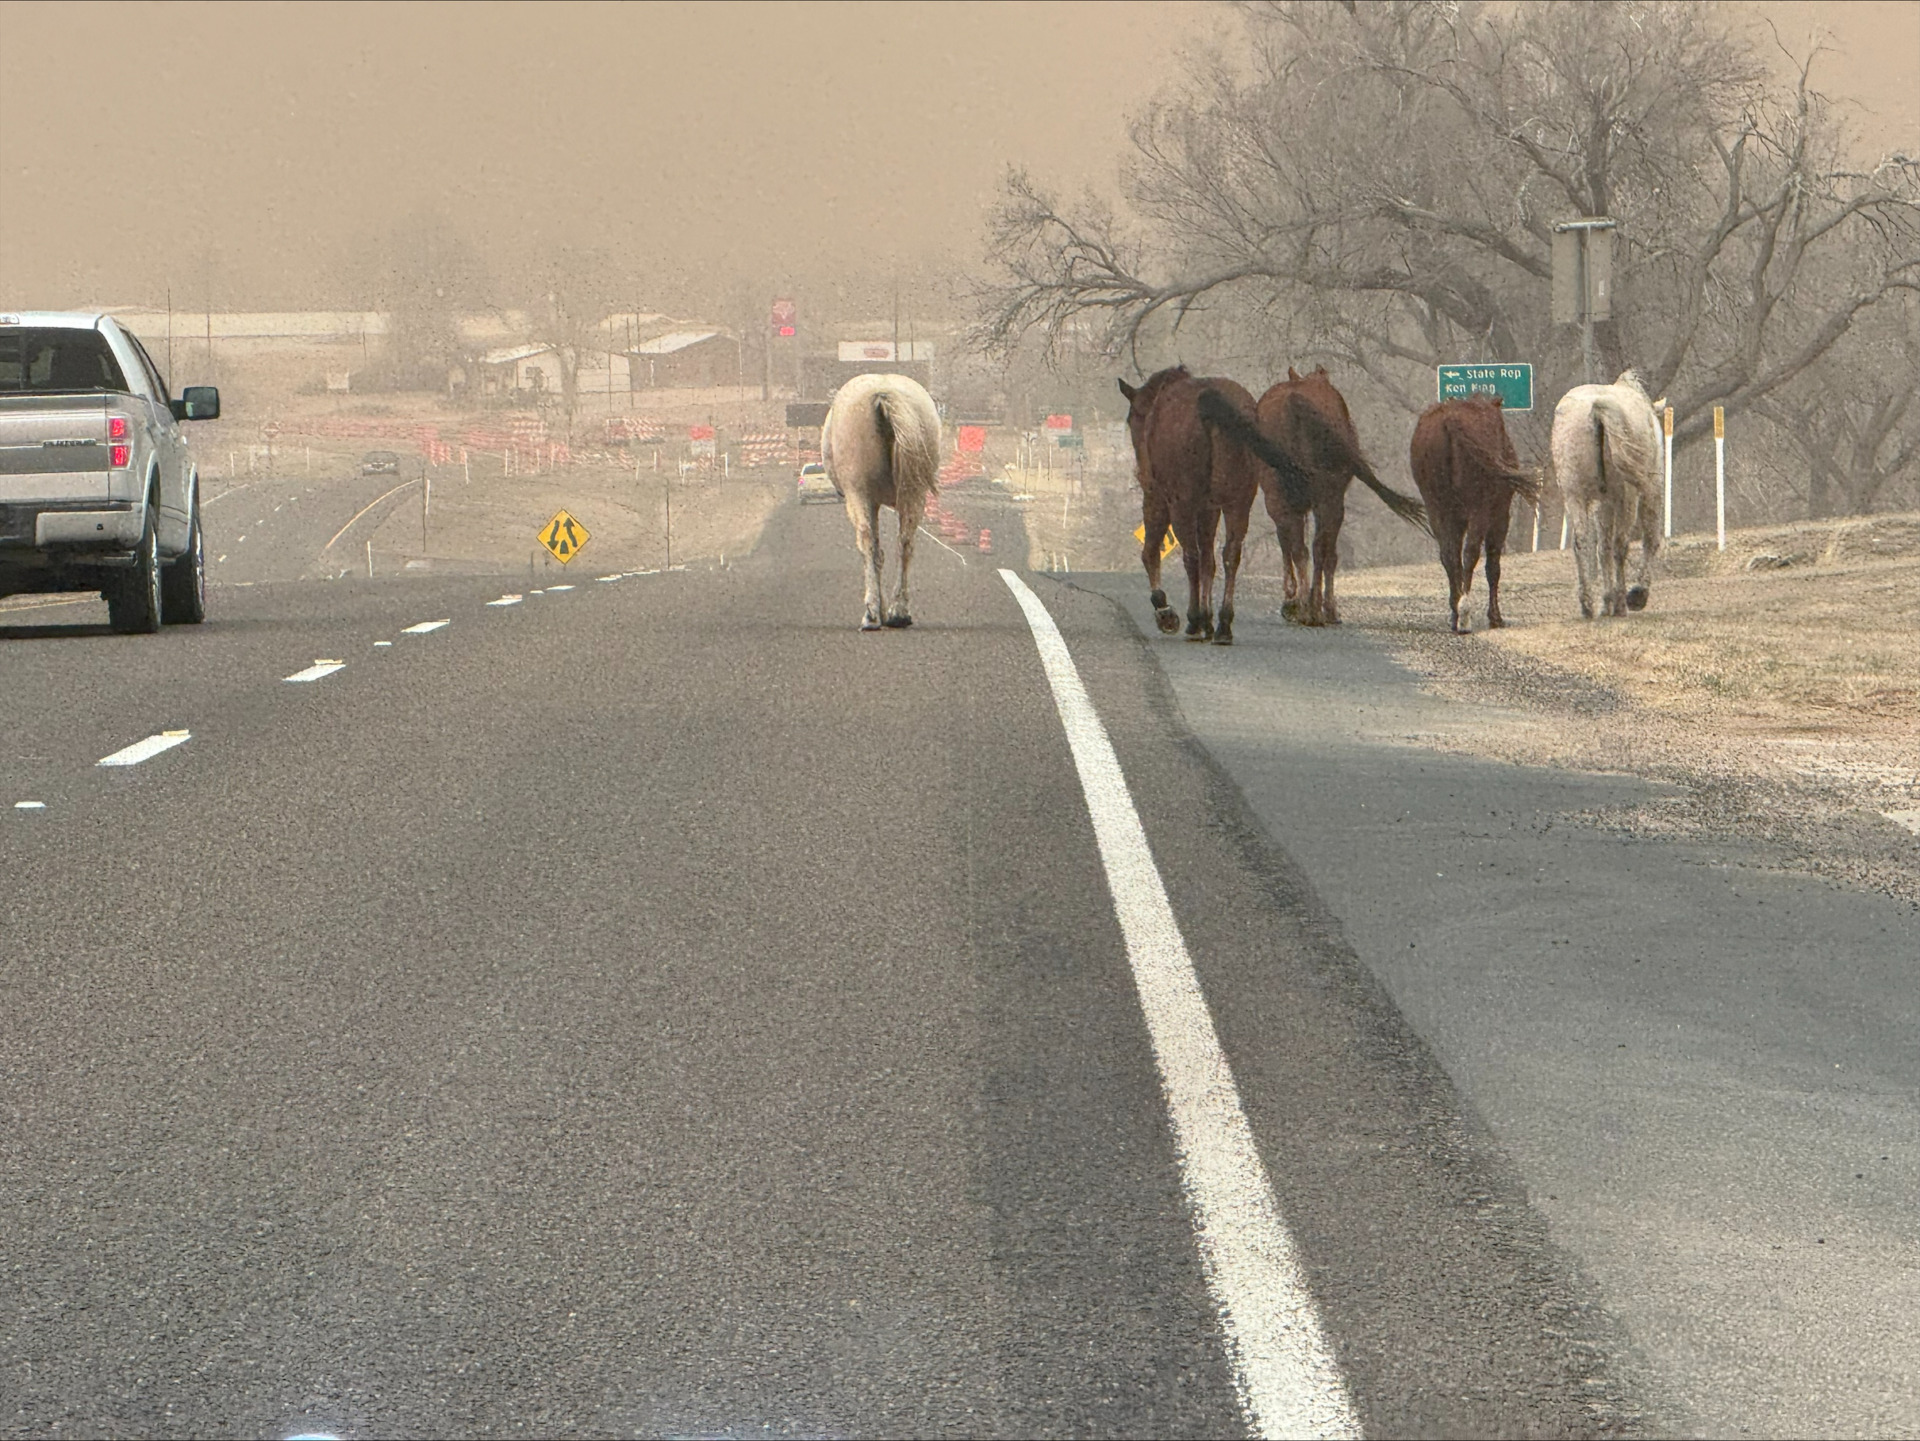 Hay, Feed, Fencing Supplies Needed to Support Panhandle Wildfire Victims